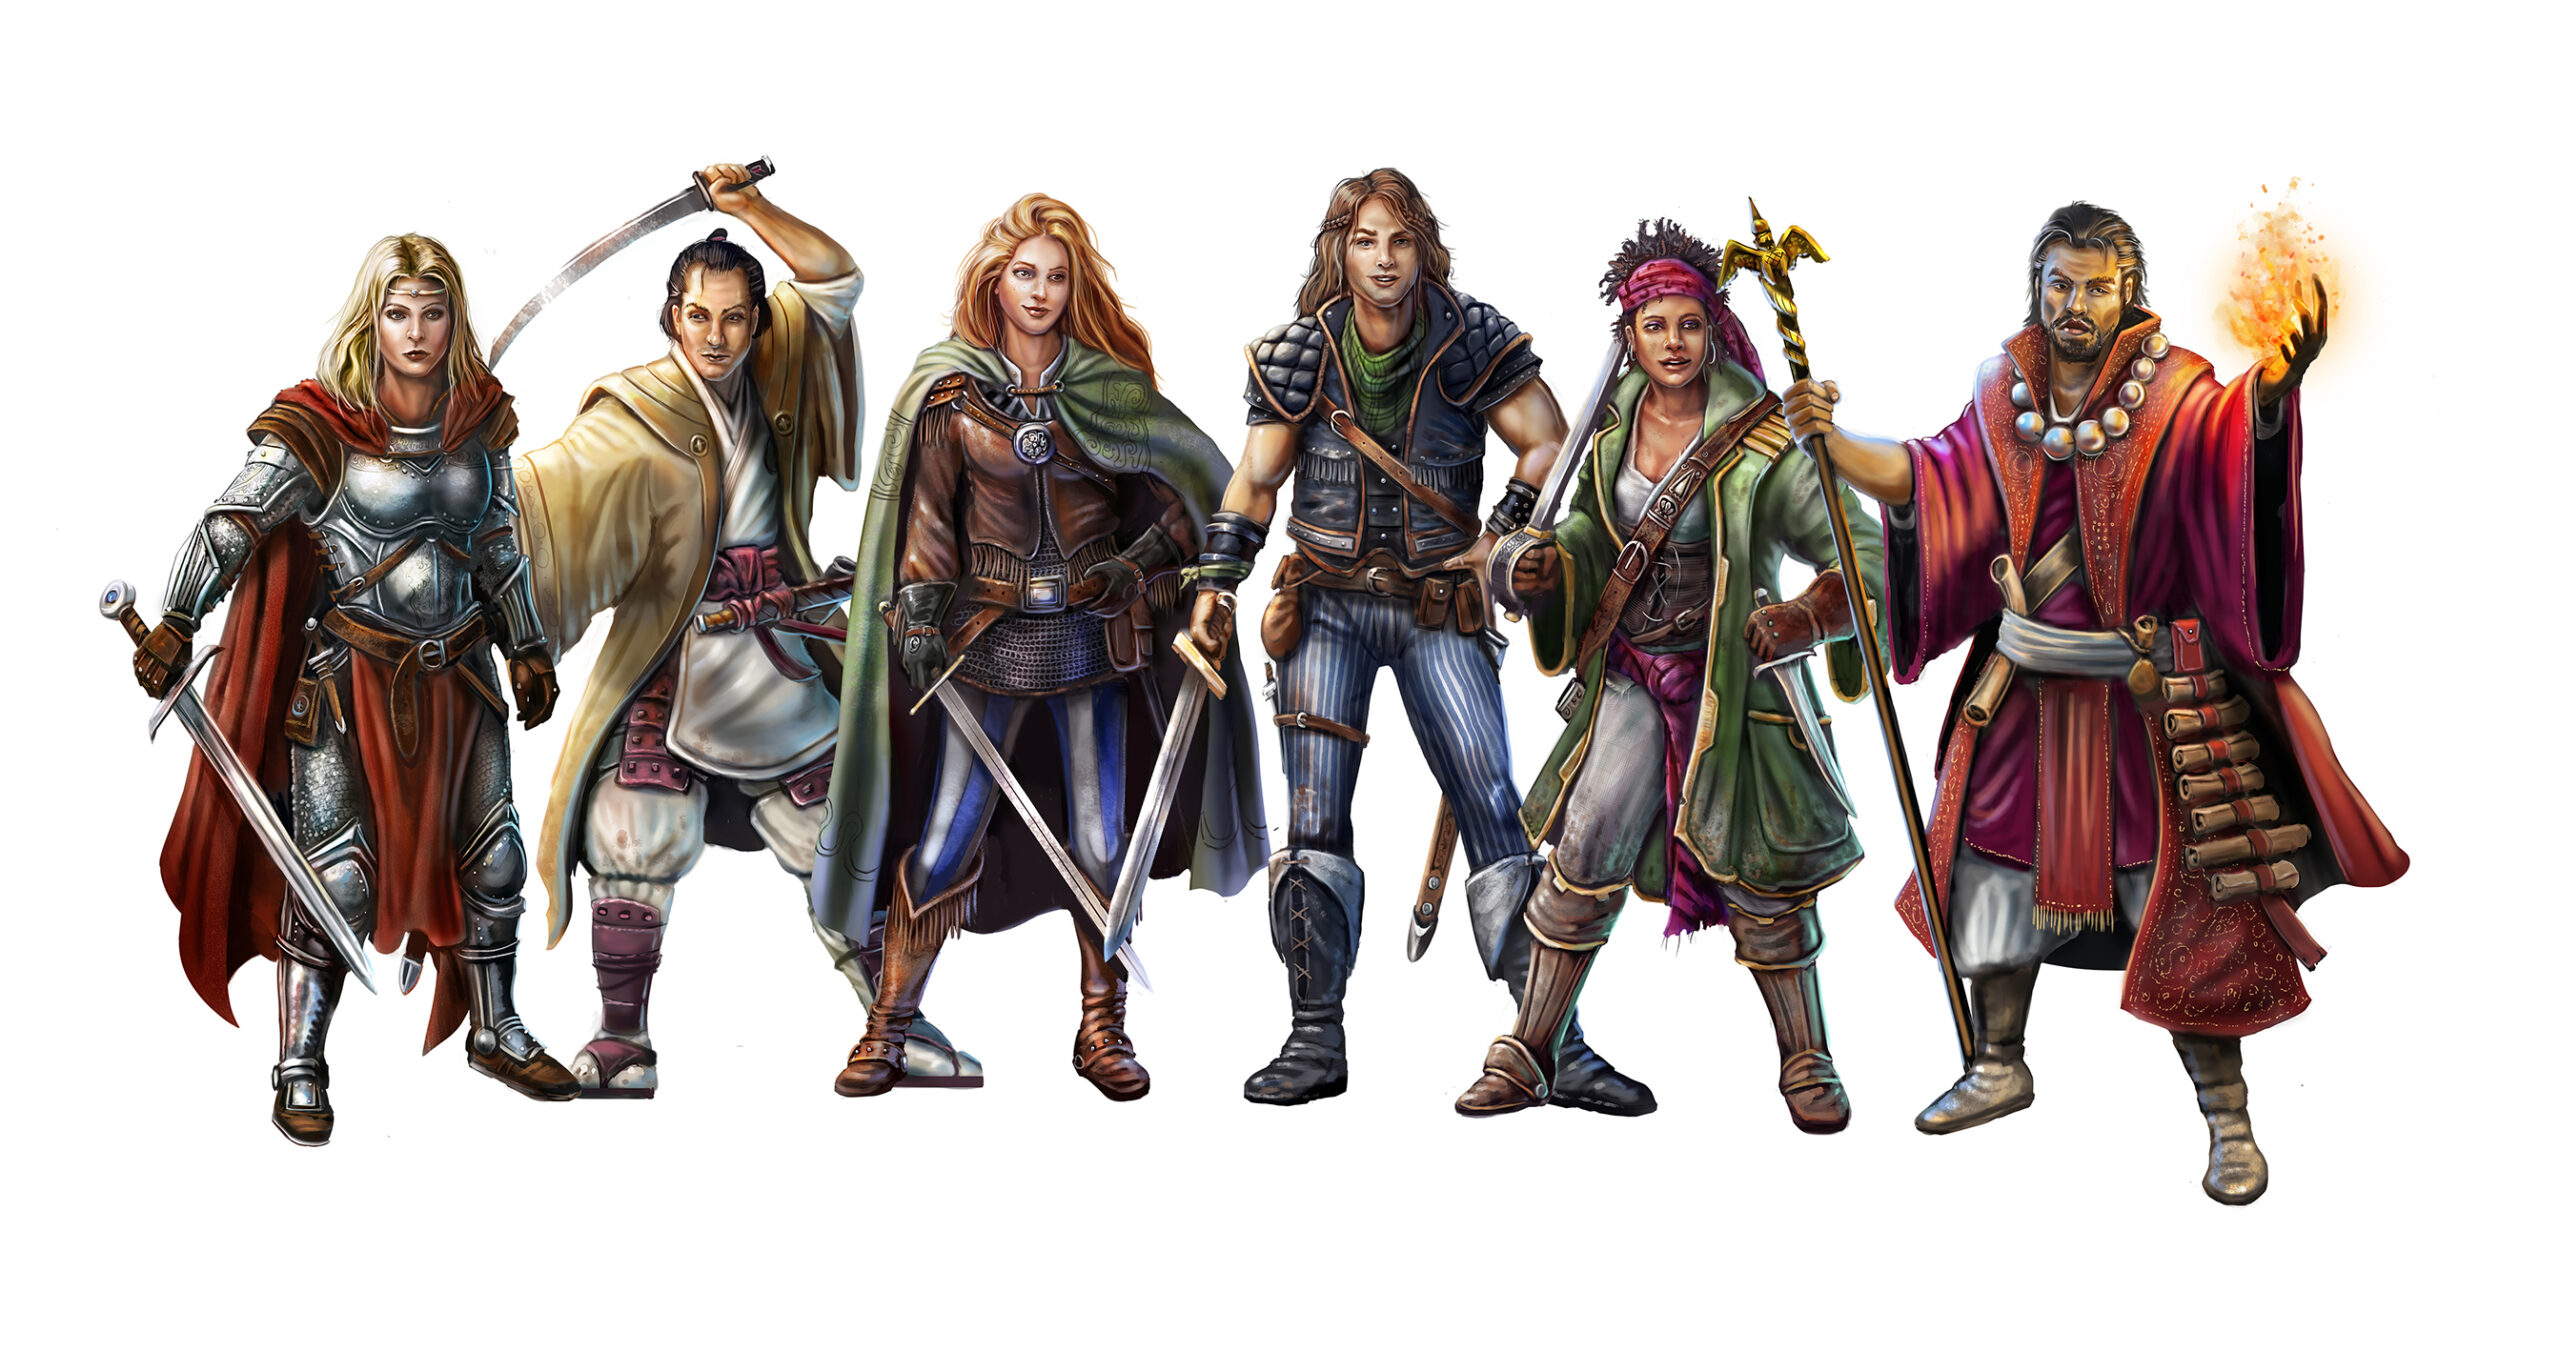 Fantasy ttrpg party, character art for legendary kingdoms by The Noble Artist